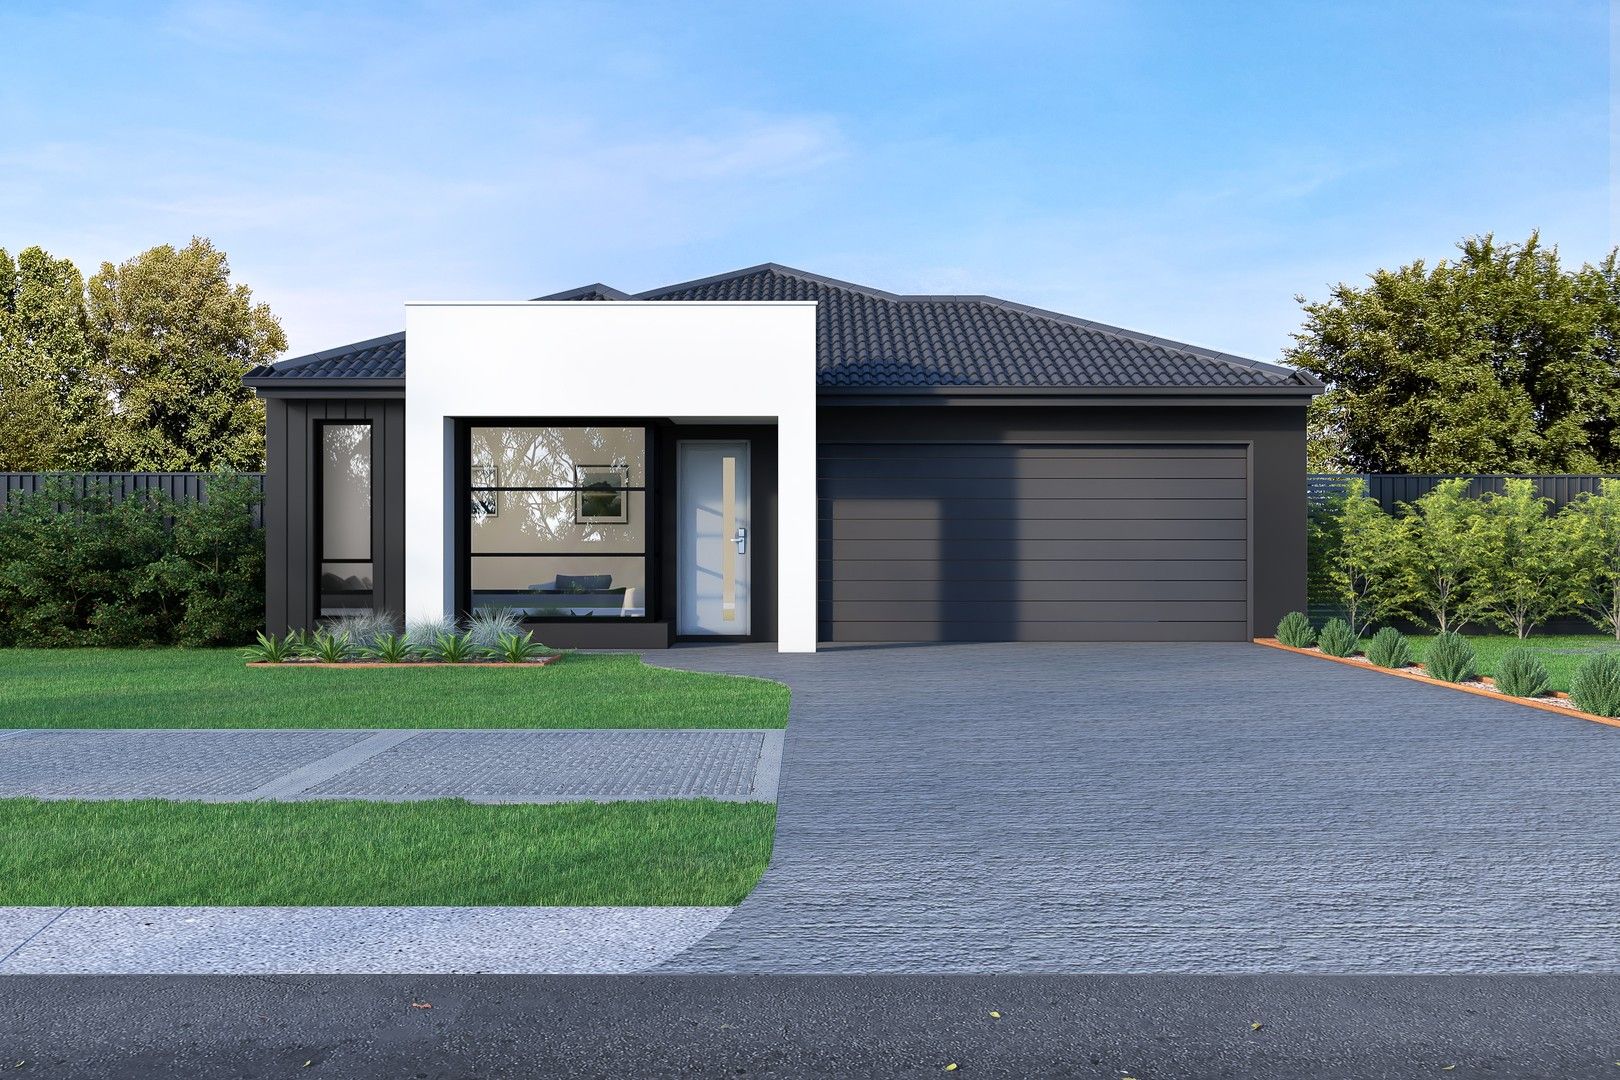 4 bedrooms New House & Land in 1220 Carradale Rd CLYDE NORTH VIC, 3978